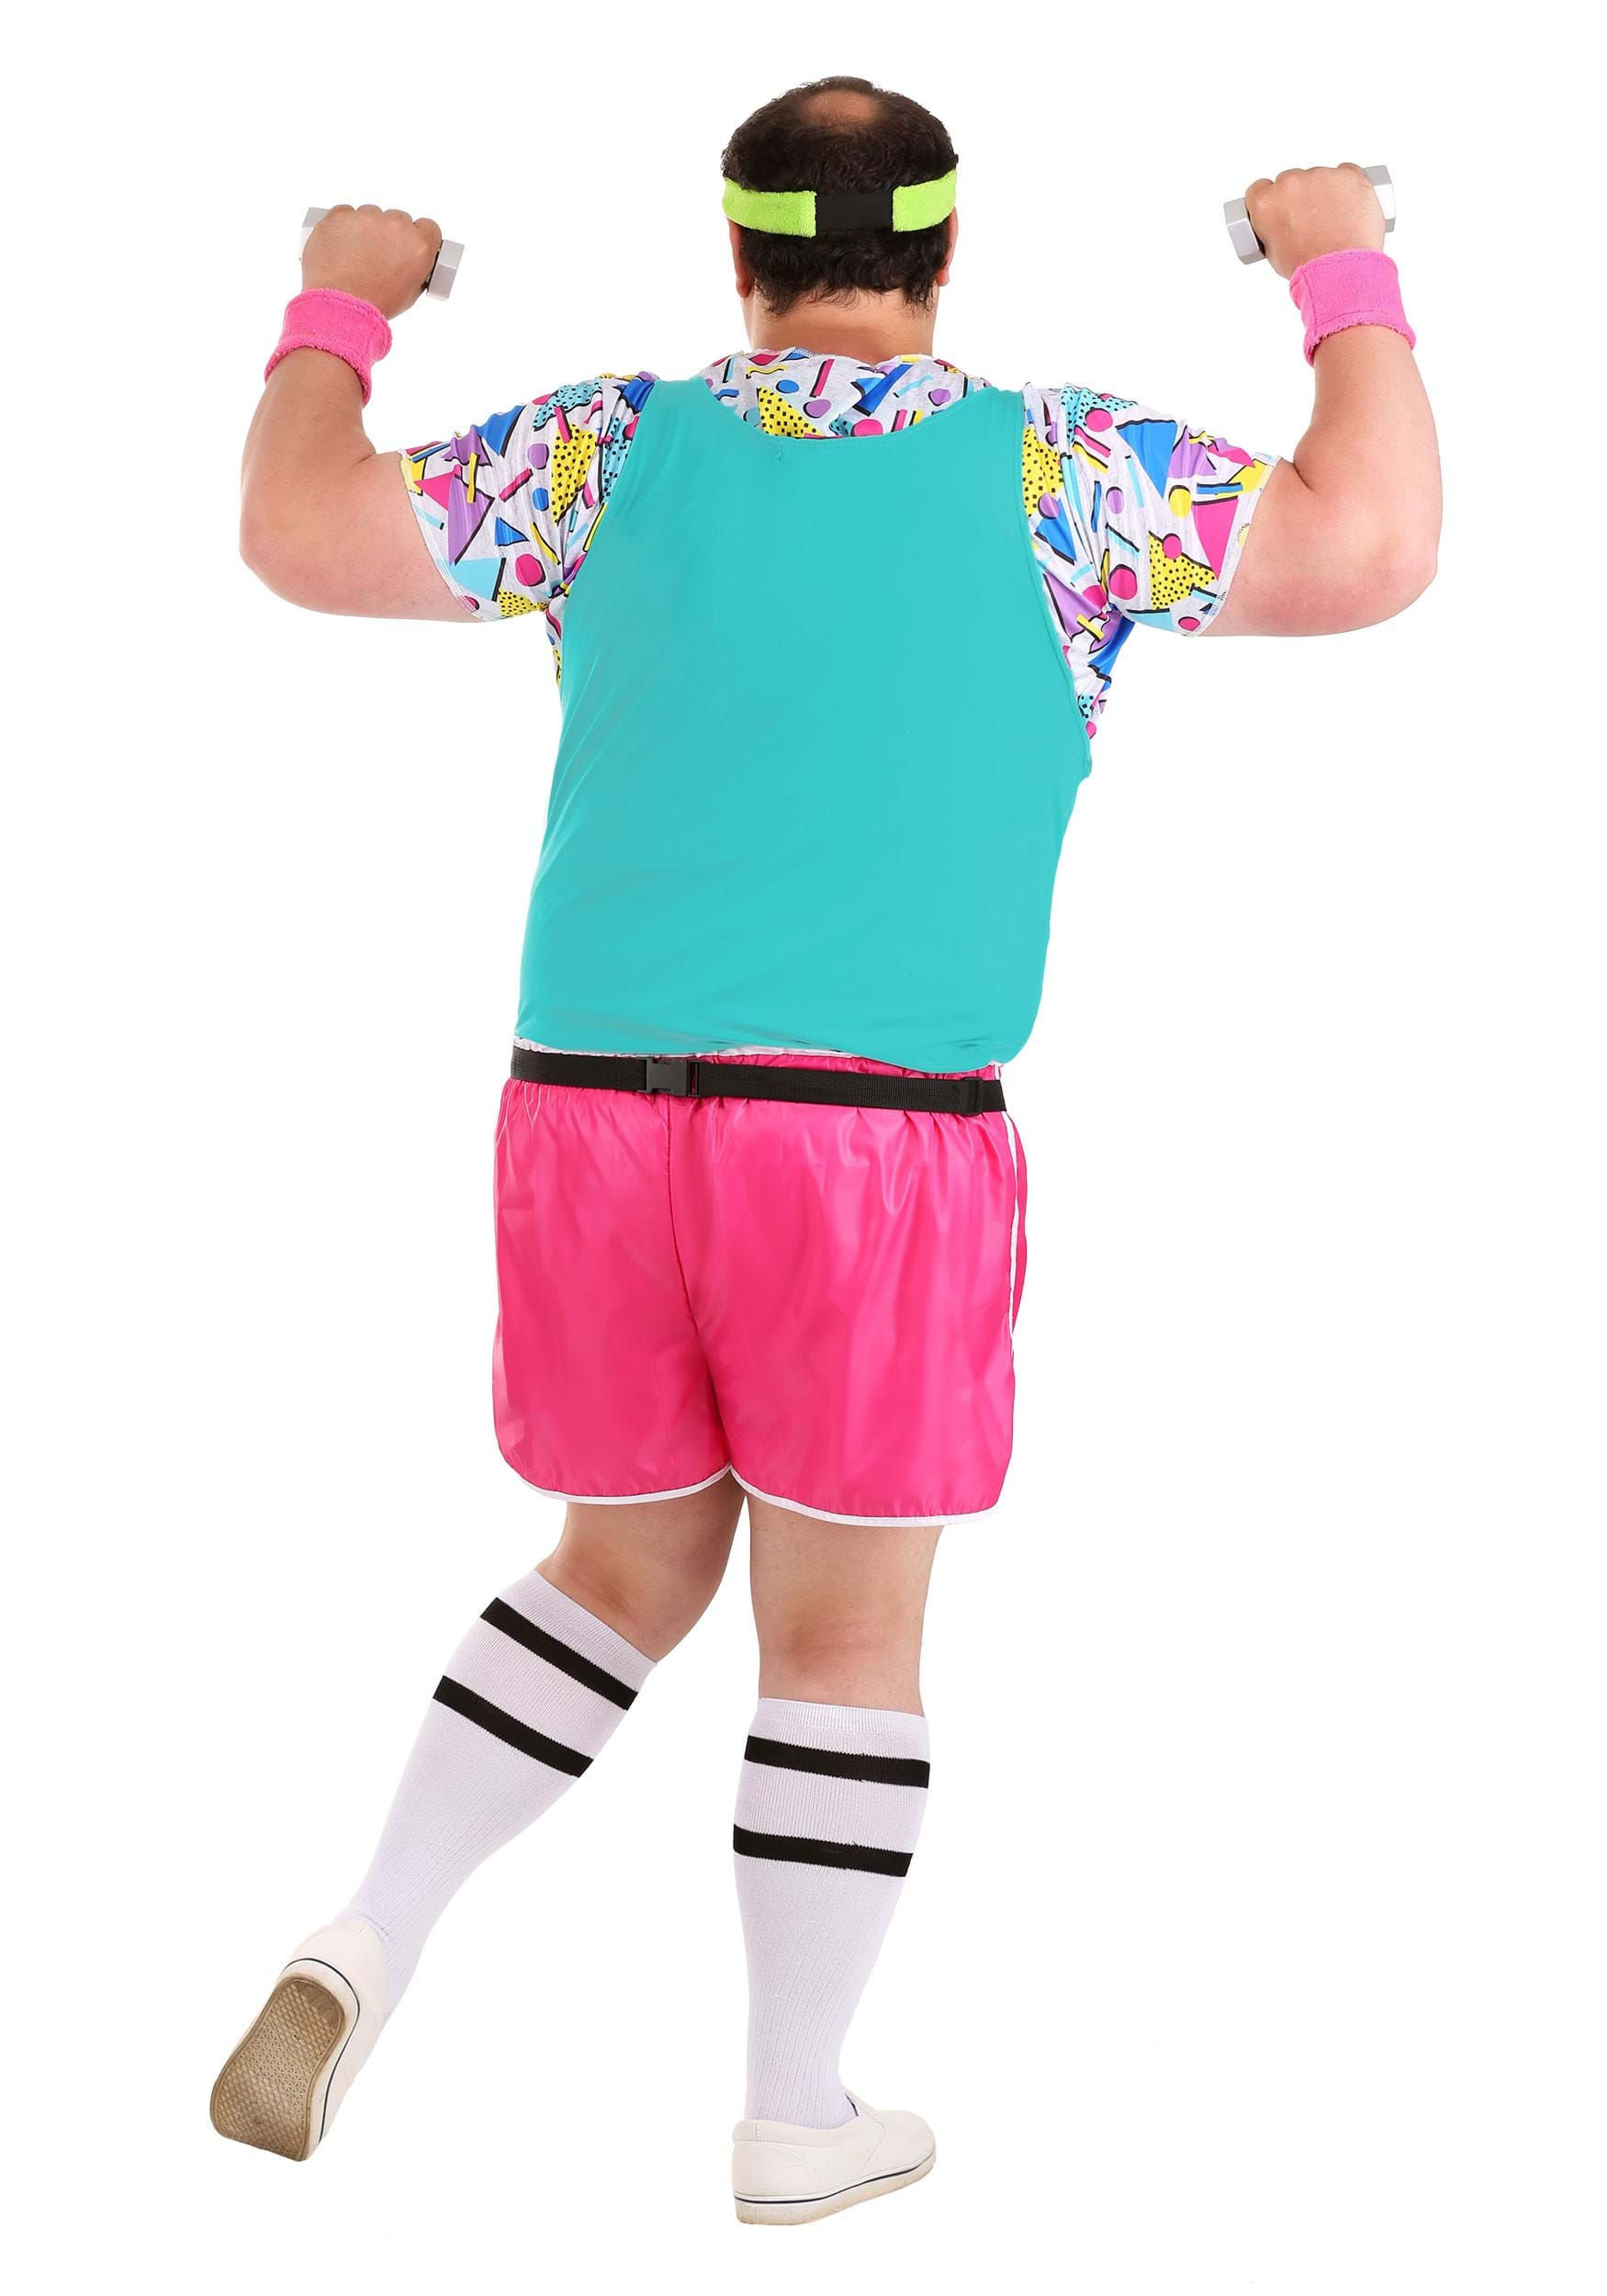 Plus Size Work It Out 80s Costume for Men's